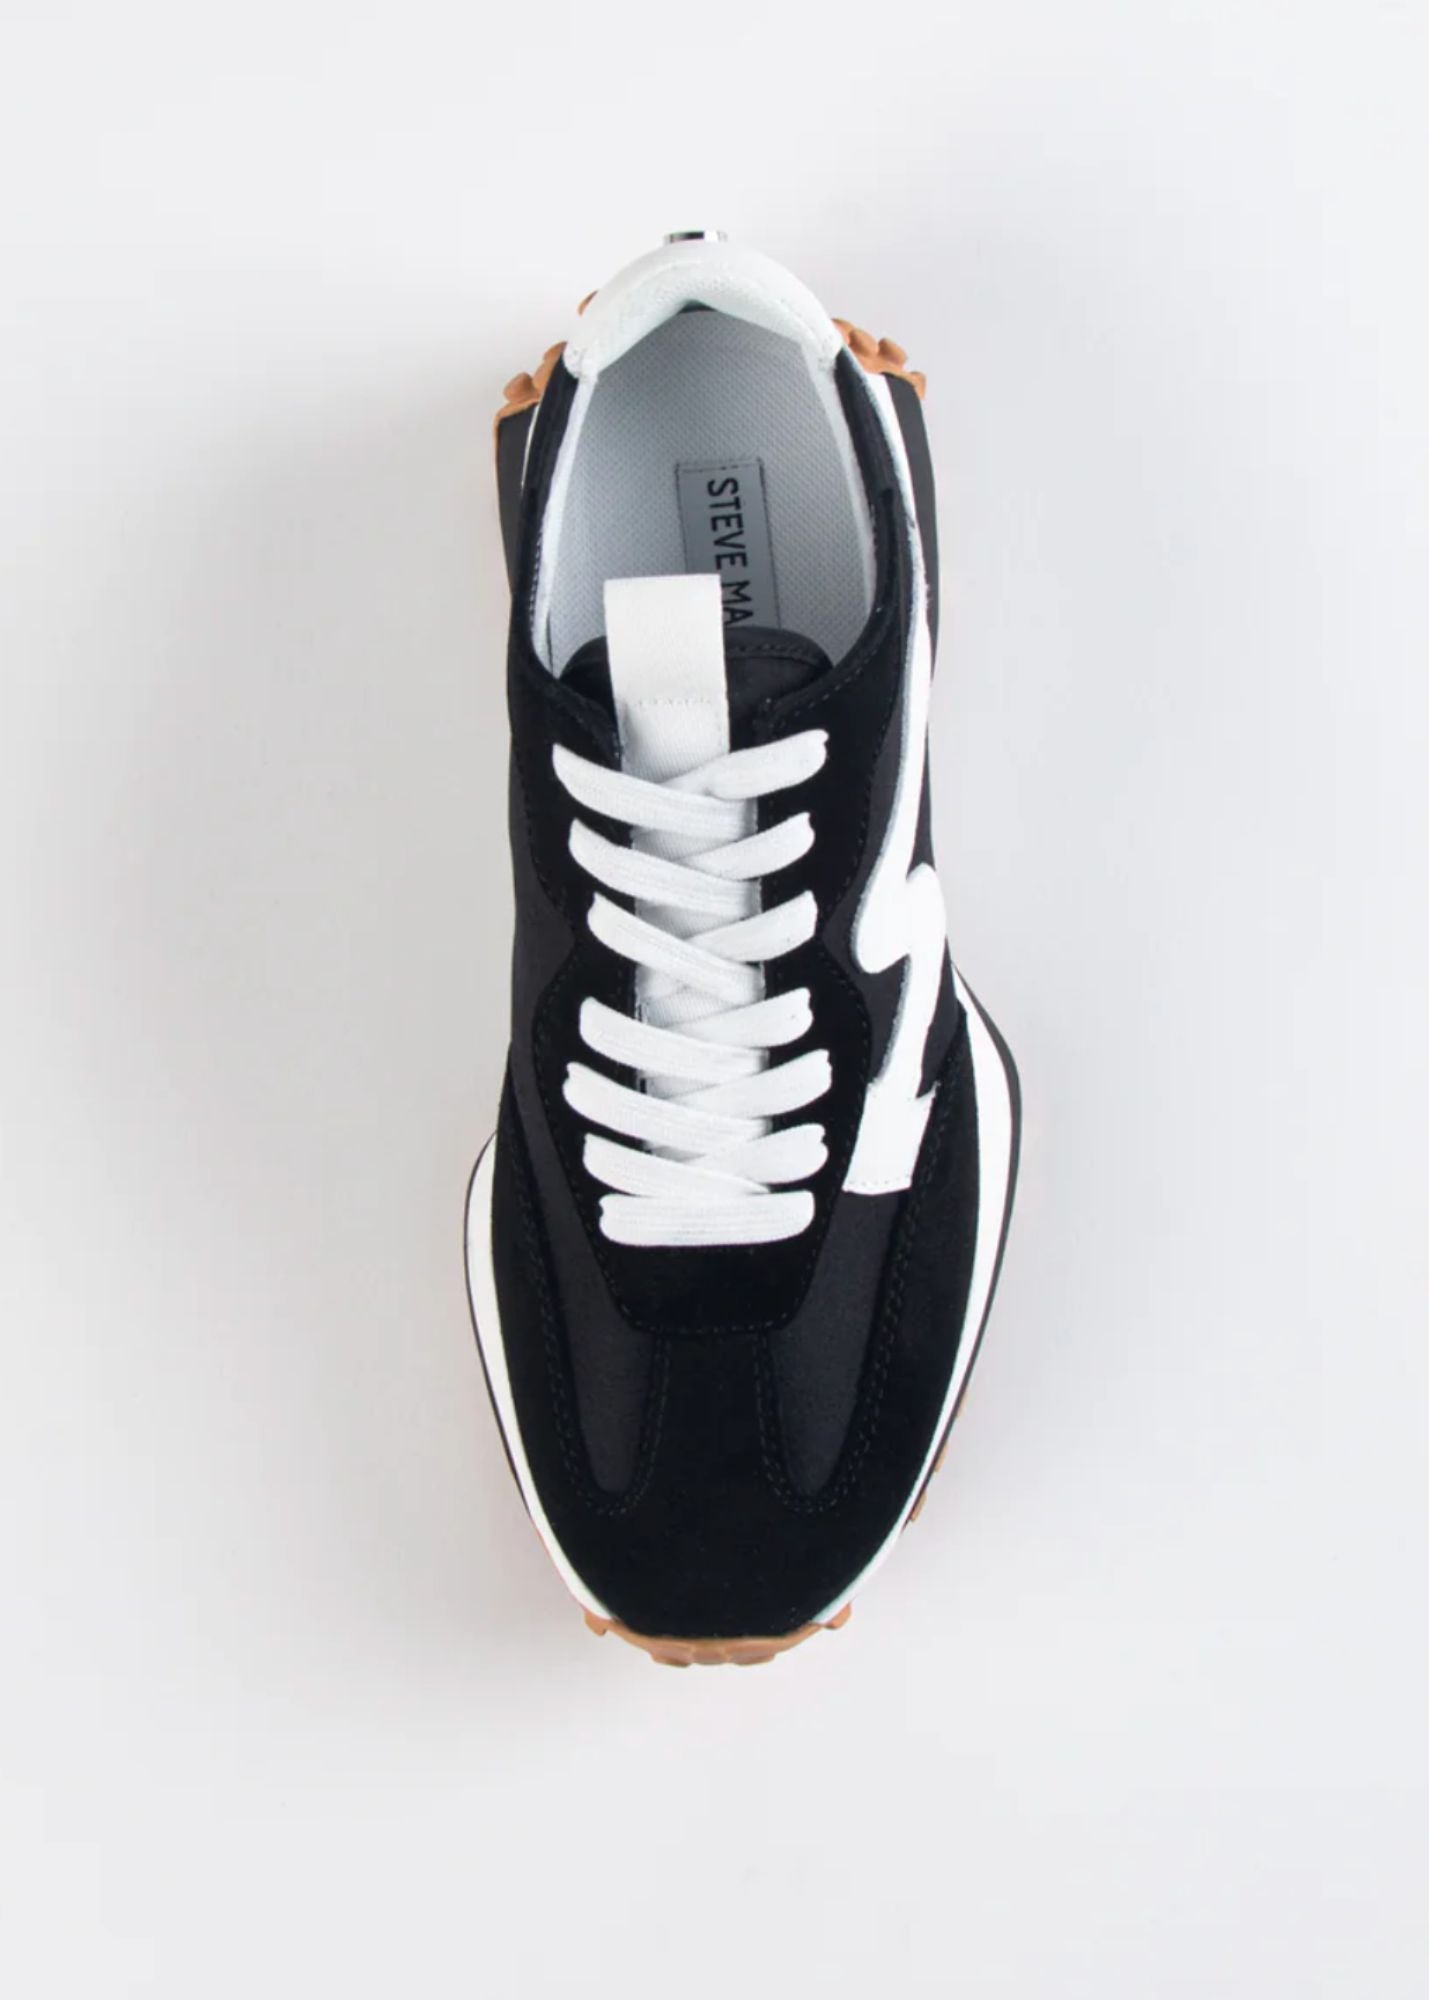 Steve Madden Campo Retro Sneakers Shoes